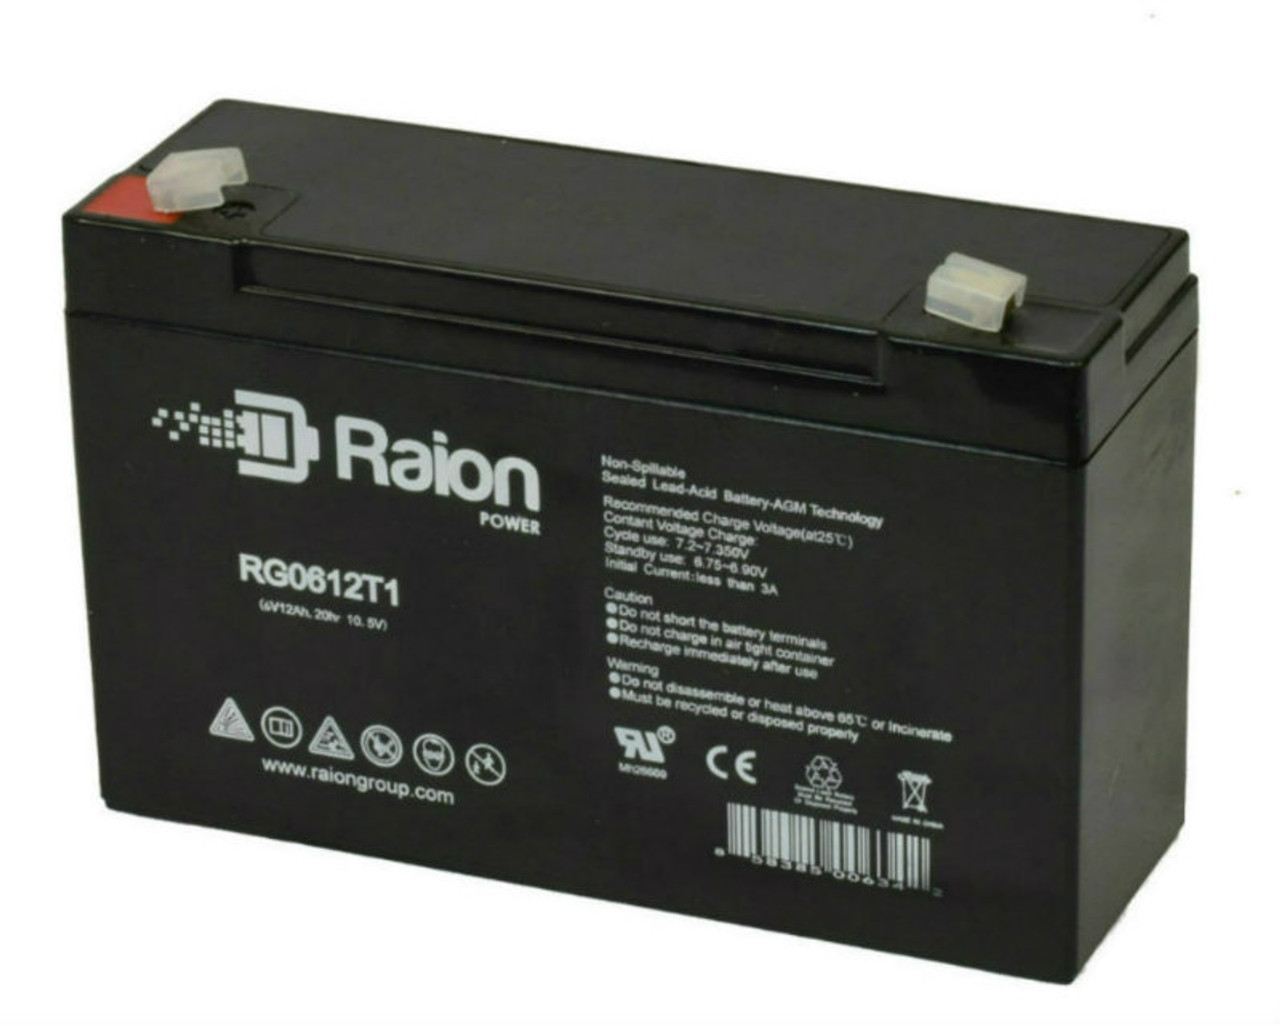 Raion Power RG06120T1 Replacement 6V 12Ah Emergency Light Battery for Lithonia ELU4